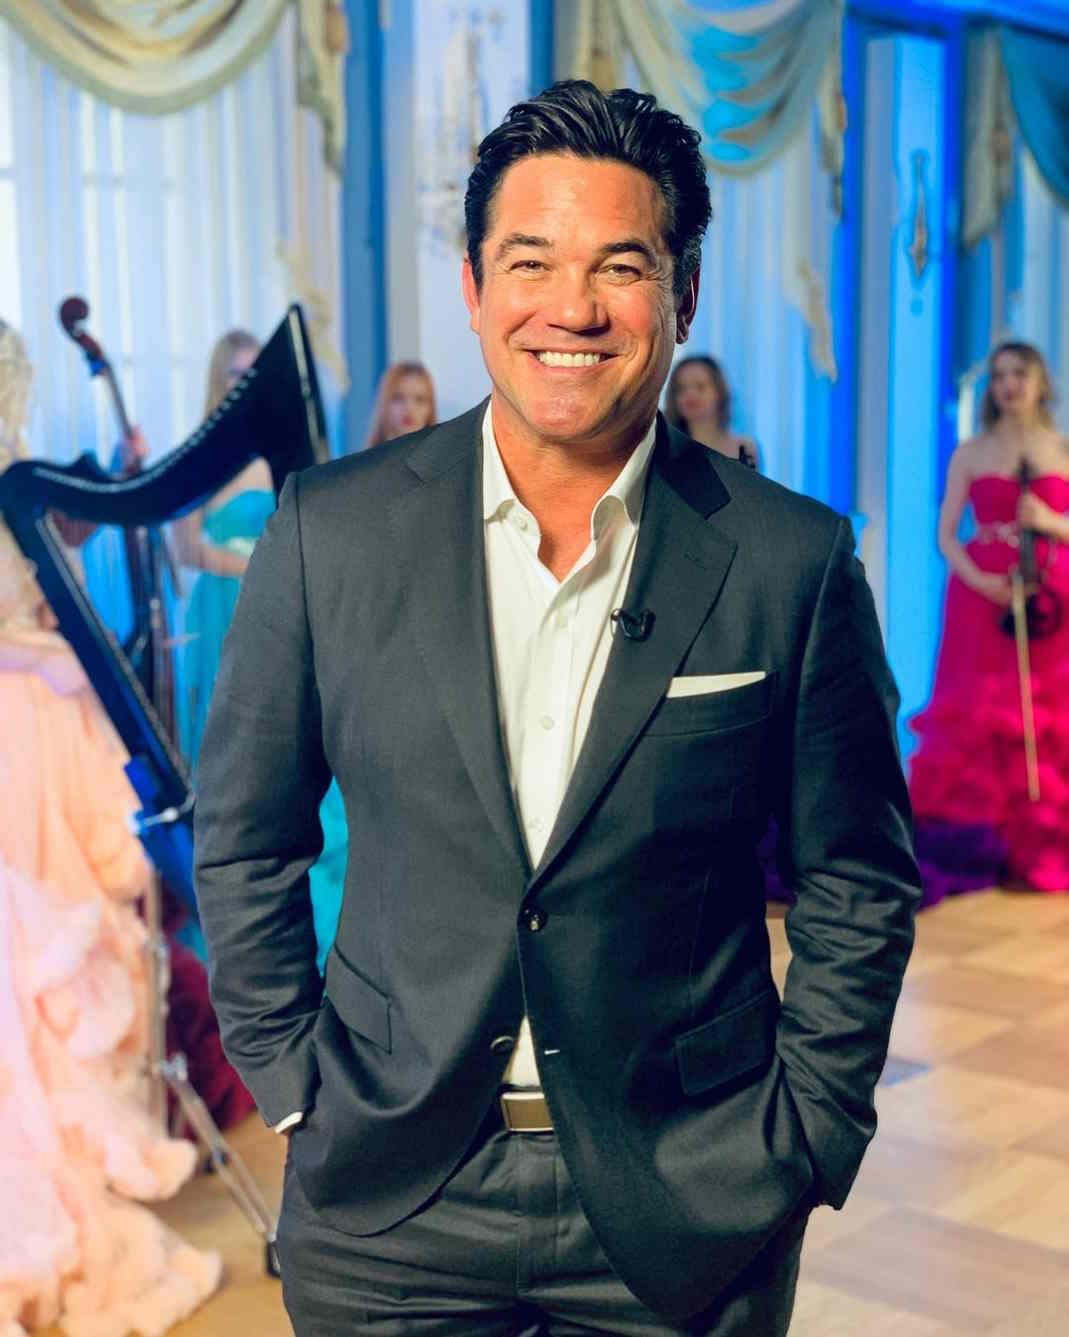 Dean Cain Biography, Age, Height, Weight, Wife, Family, and Career